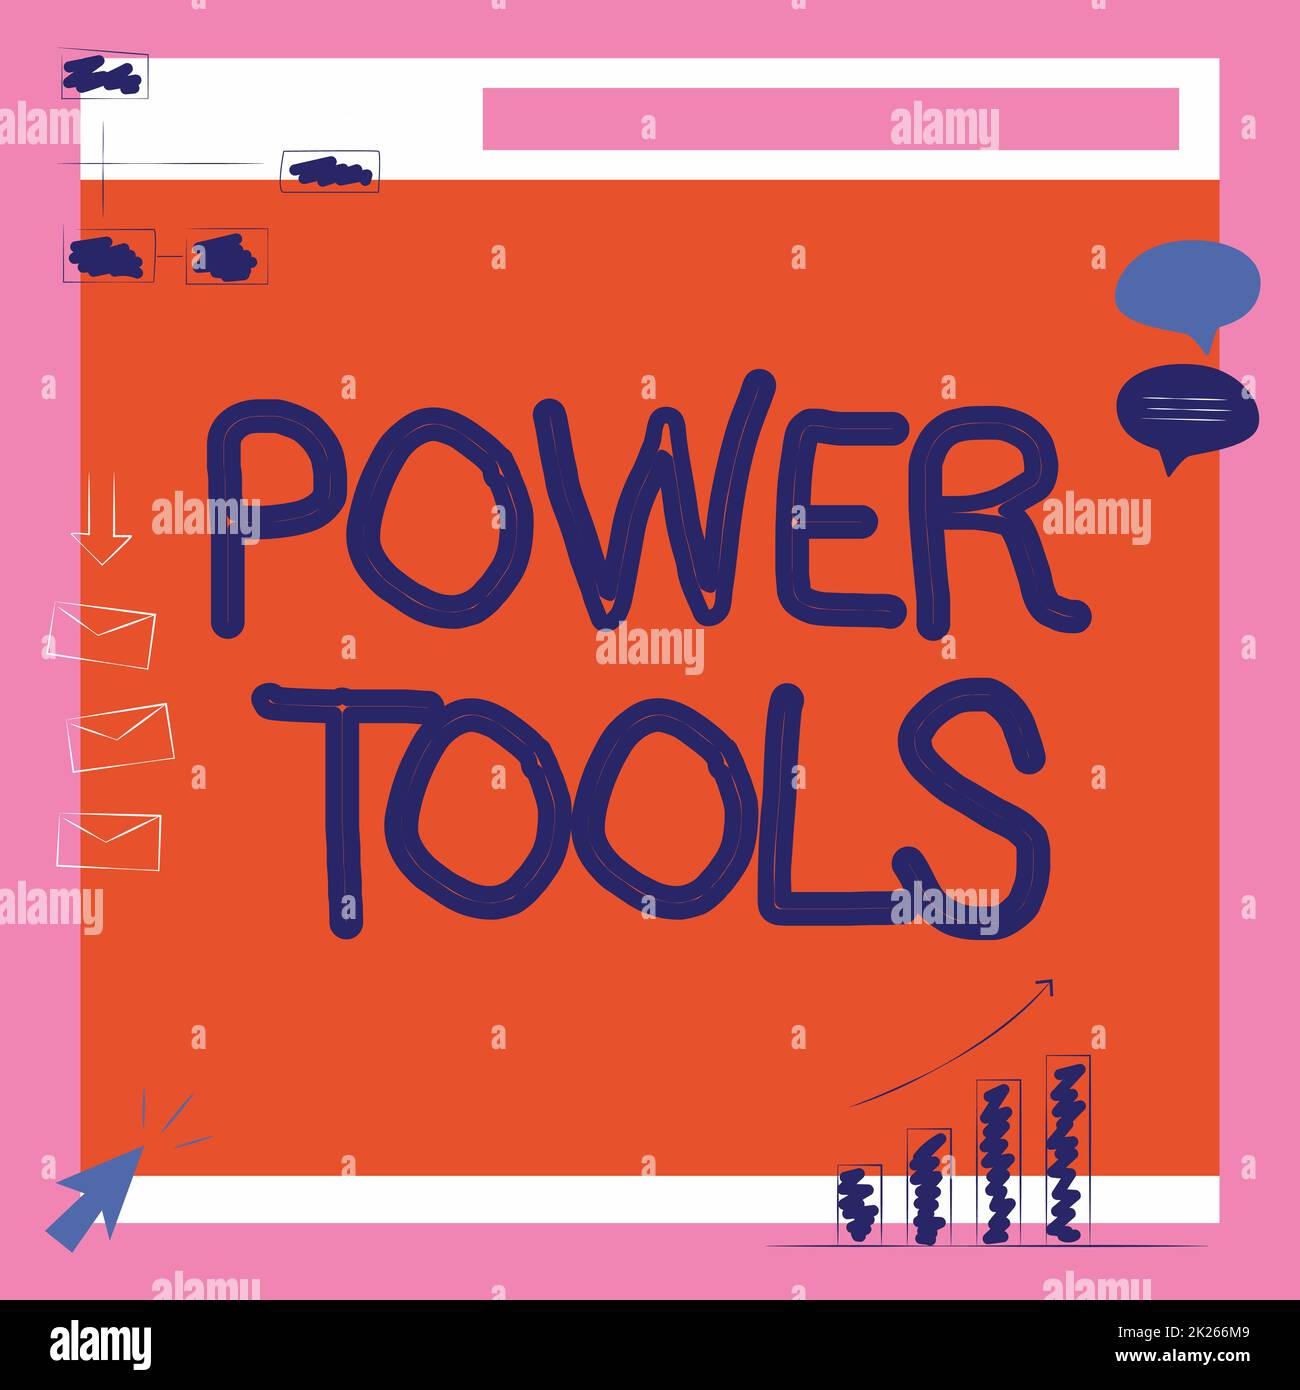 Conceptual caption Power Tools. Concept meaning tools powered by an electric motor mostly used for manual labor Illustration Of Board Receiving Messages And Searching Improvements. Stock Photo